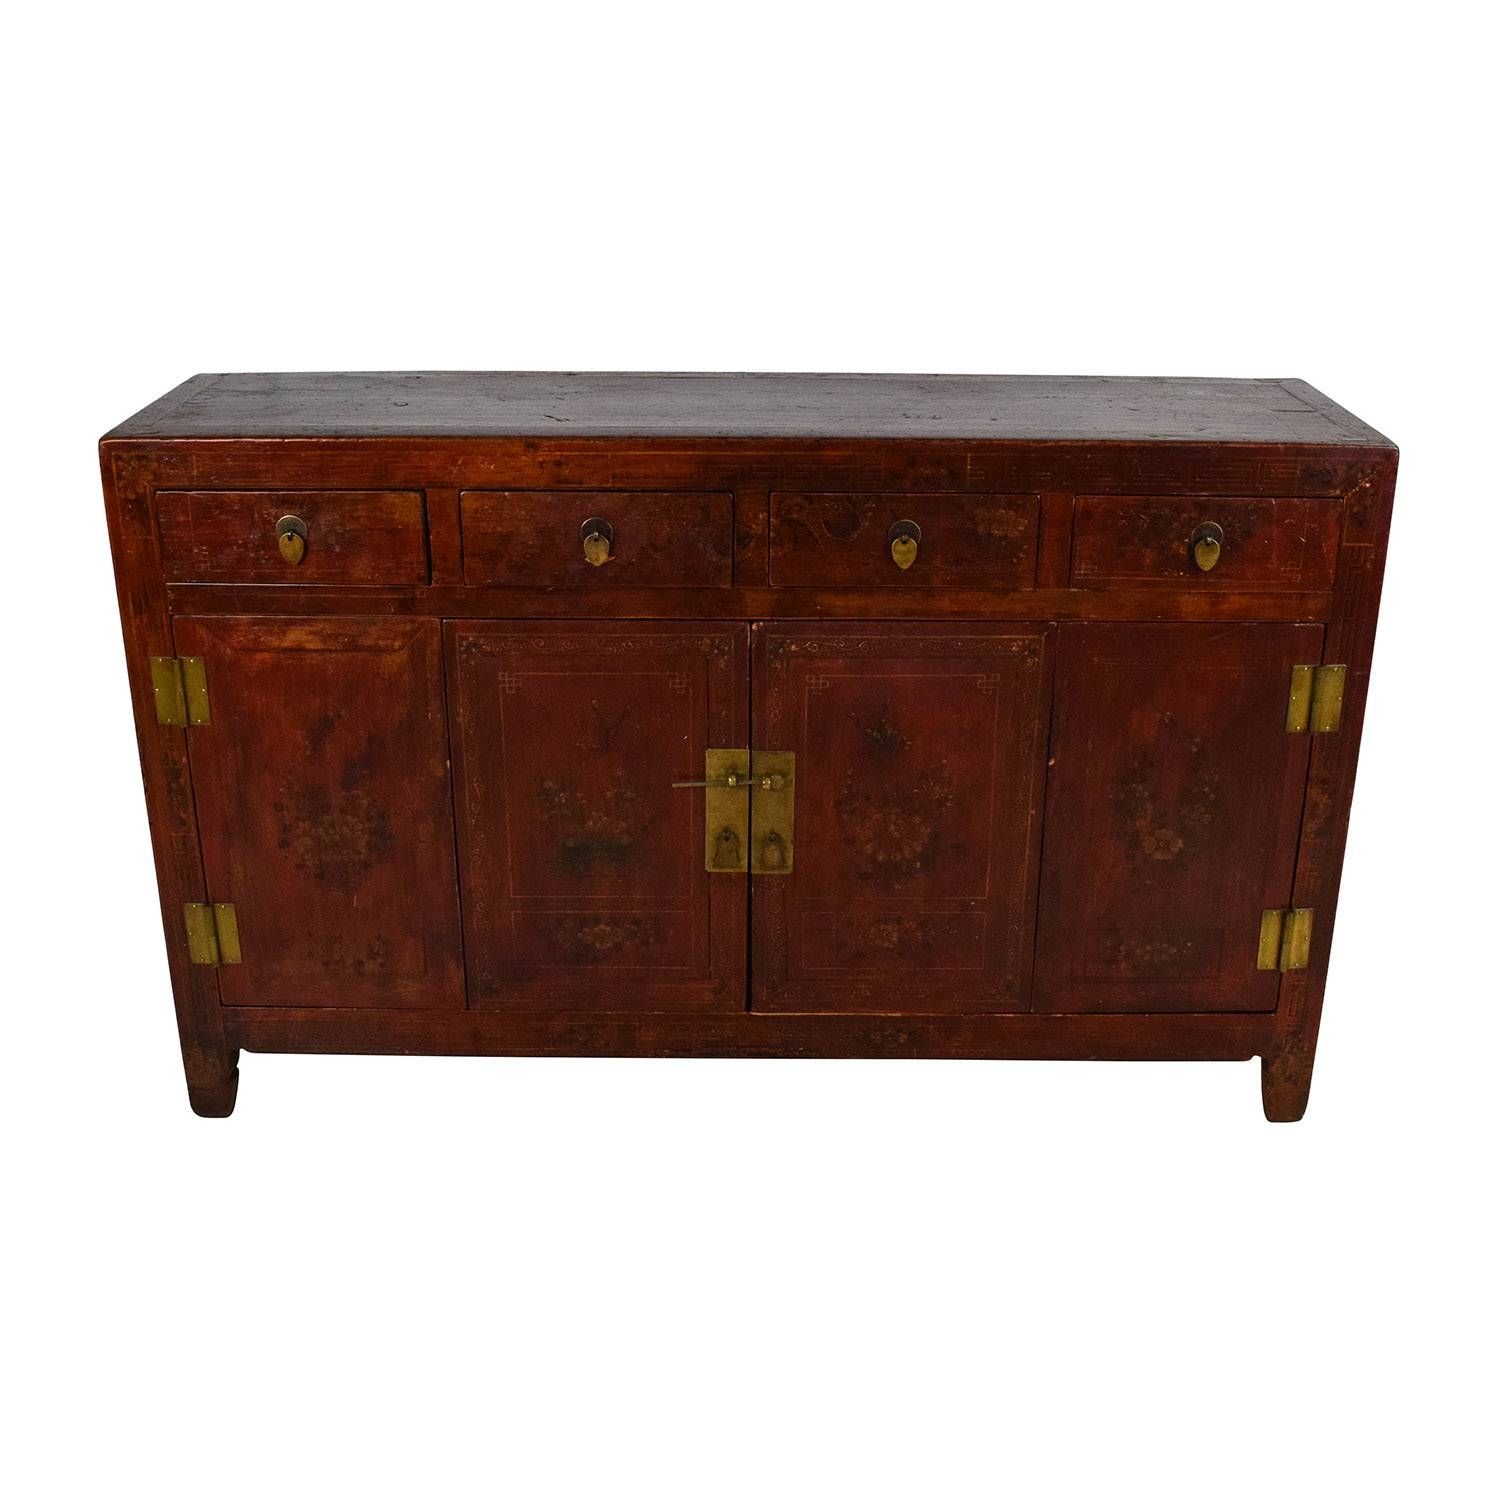 66% Off – Solid Wood Southeast Asian Credenza / Storage Throughout Asian Sideboards (View 6 of 20)